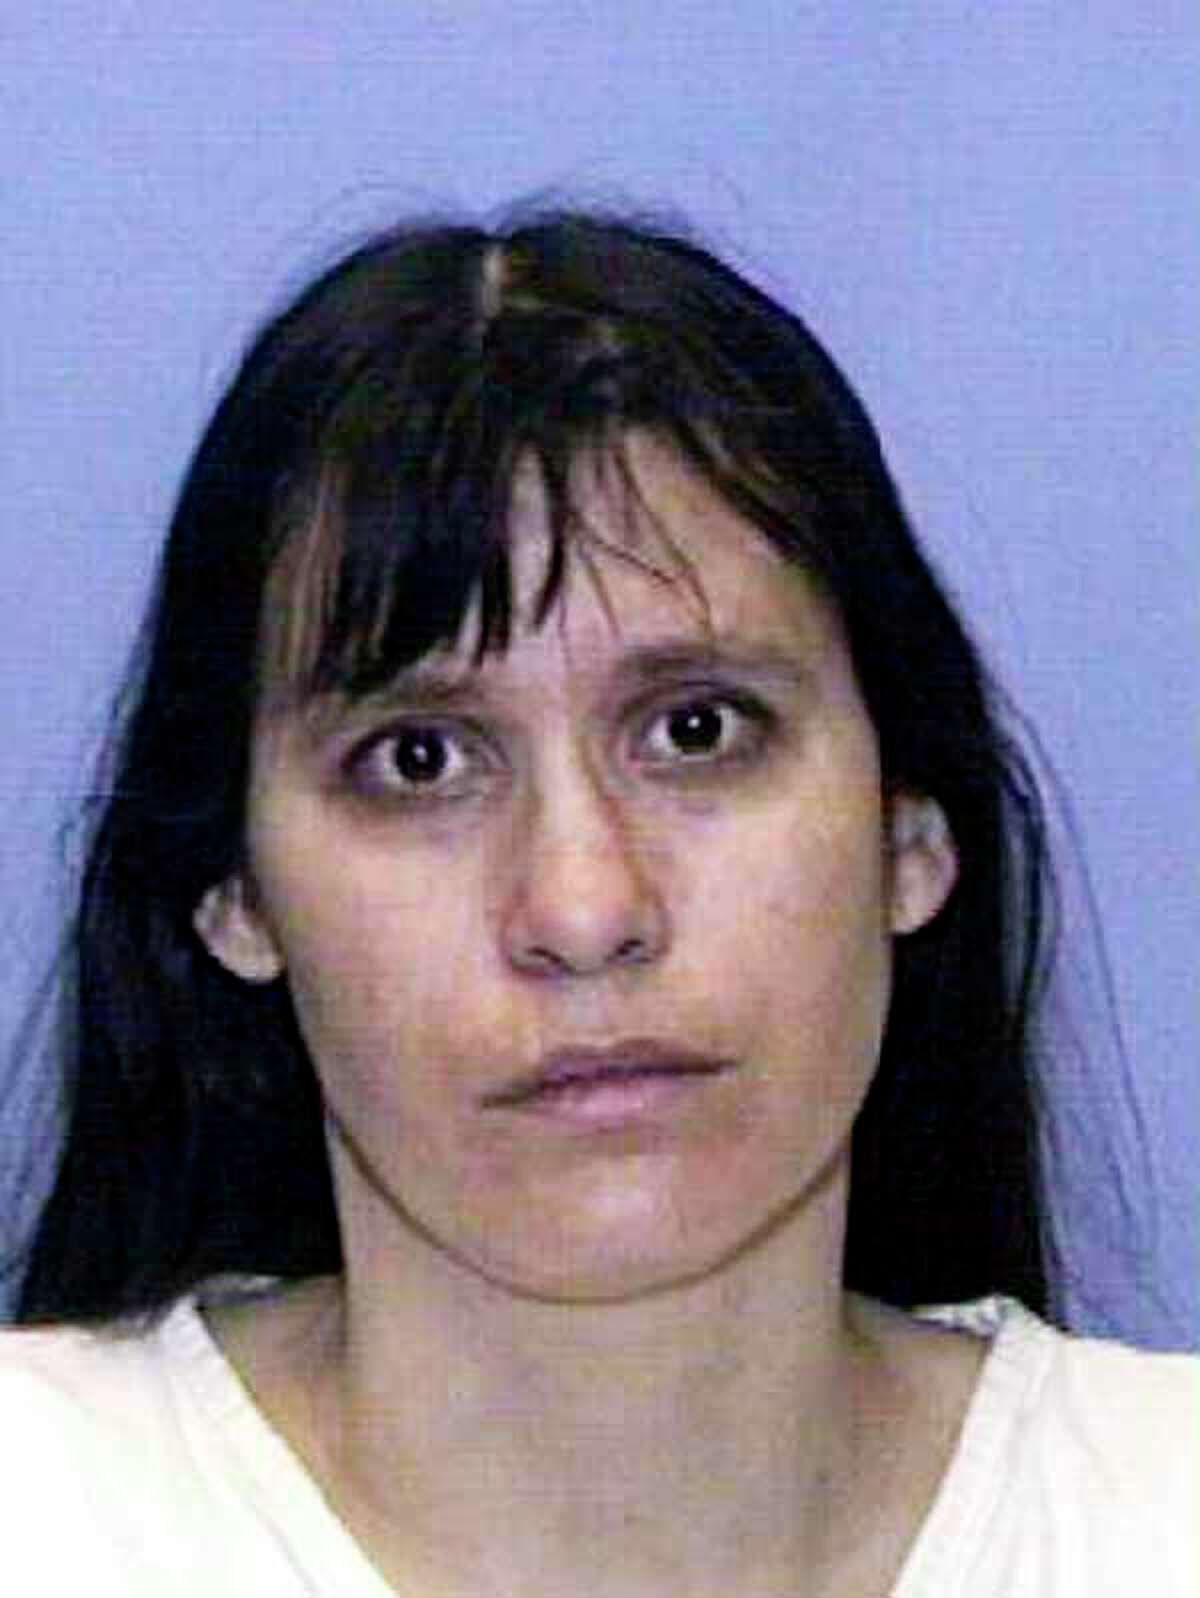 MARCH 21: (FILE PHOTO) Convicted child killer Andrea Yates is shown in this Texas Department of Criminal Justice handout photo March 21, 2002. Yates confessed to drowning her five children in a bathtub and was convicted on two counts of capital murder and sentenced to life in prison. A Texas Court of Criminal Appeals refused to reconsider a lower ruling that overturned the convictions of Yates on November 9, 2005 likely forcing a retrial of the case. (Photo by Texas Department of Criminal Justice via Getty Images)